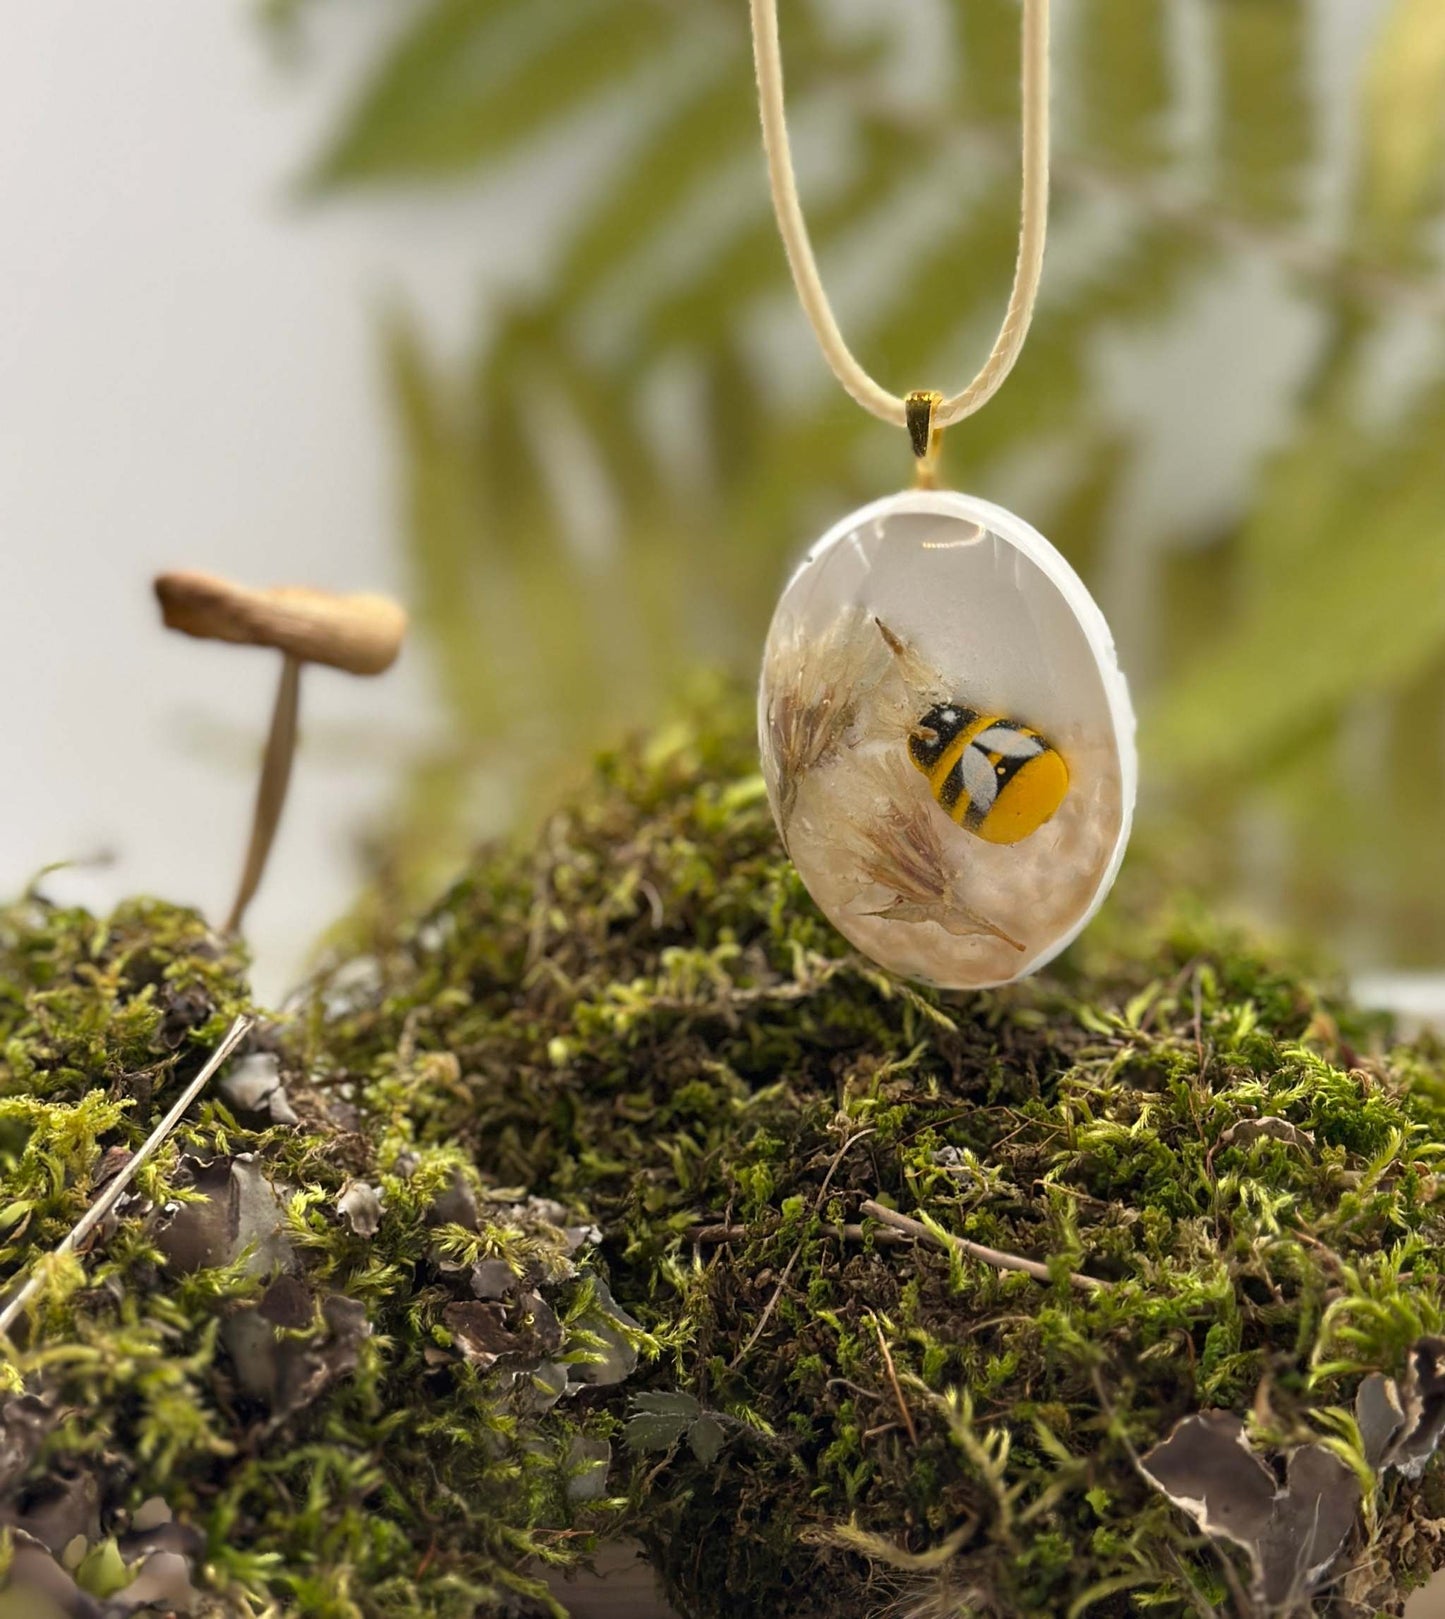 Bees & Blooms Handmade Resin Necklace with natural Dried Flowers